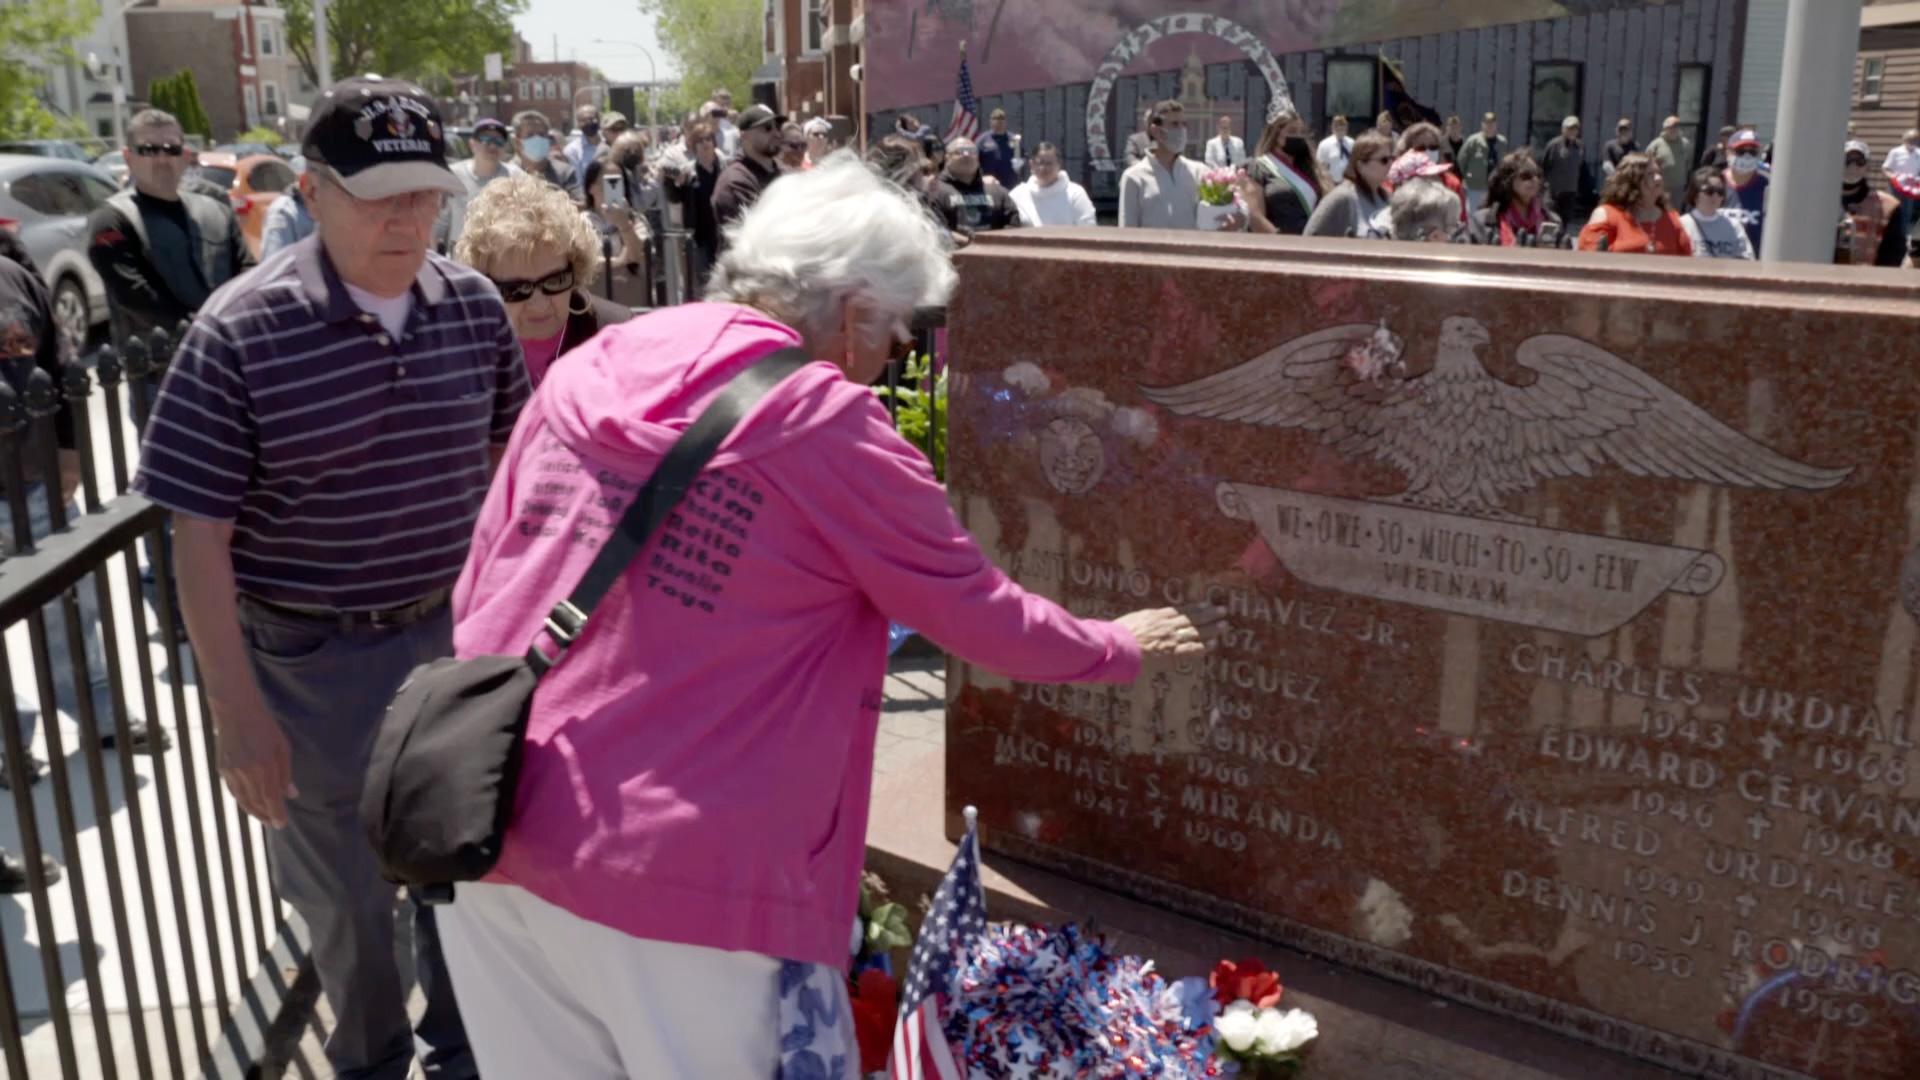 Woman touching Vietnam memorial with crowd of people around and in background